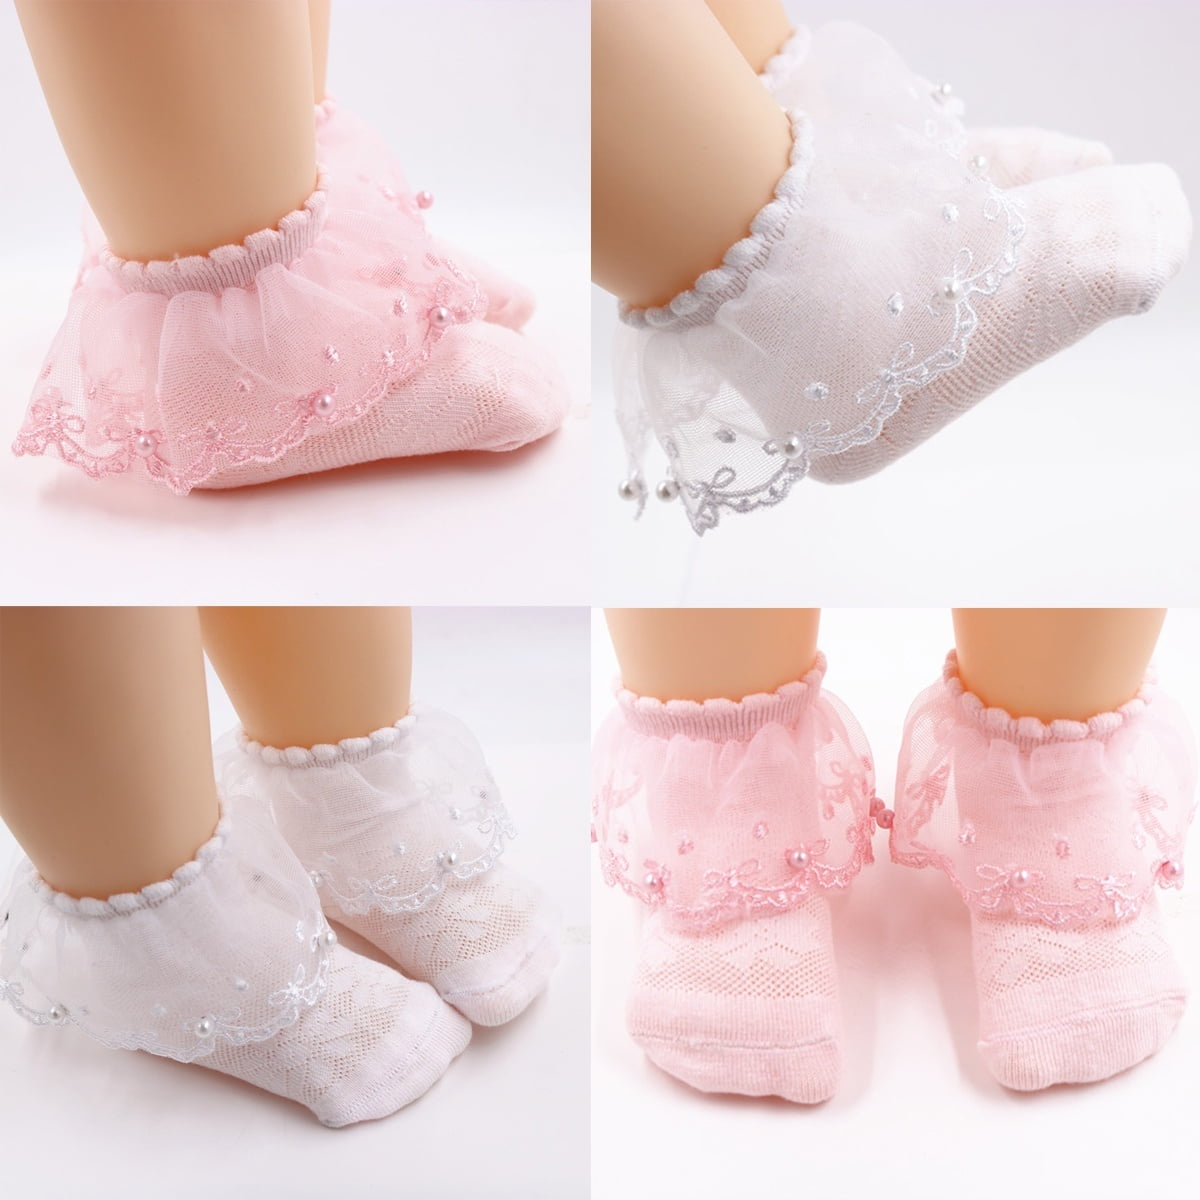 5 Pairs Cotton Socks Thin Mesh Children Stockings Lace Ruffle Frilly Ankle Sock 